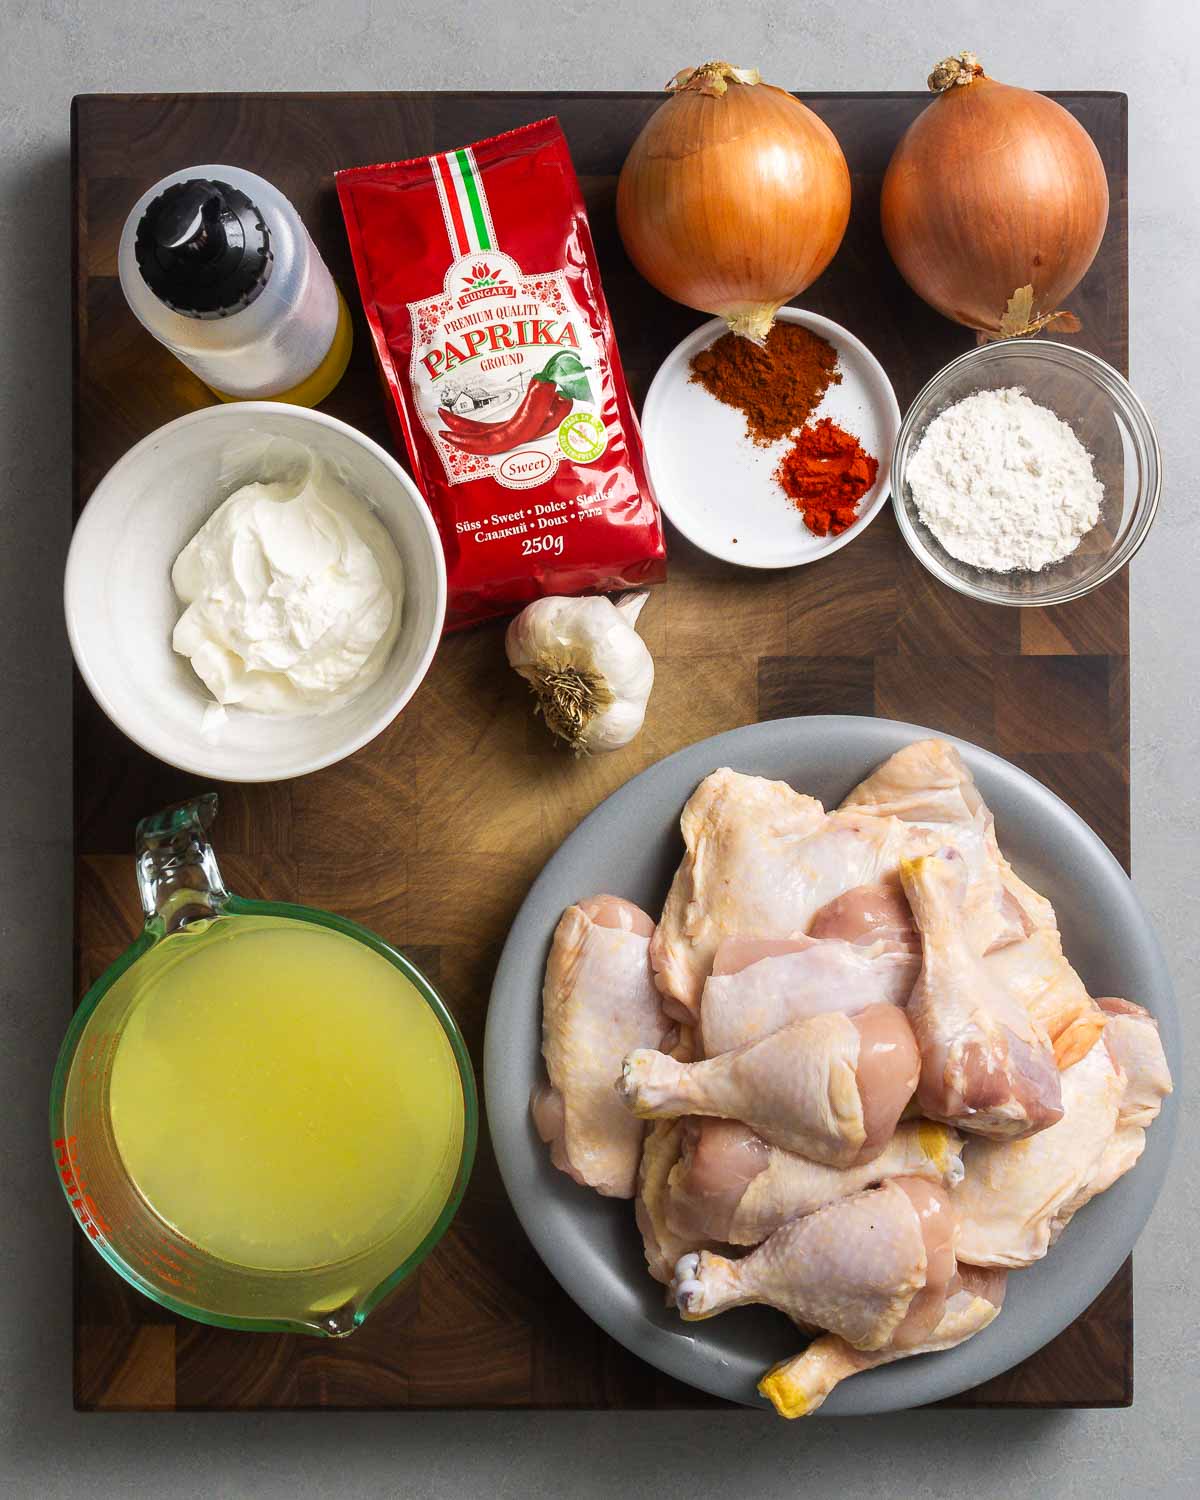 Ingredients shown: olive oil, Hungarian paprikas, onions, flour, sour cream, chicken stock, garlic, and plate of chicken pieces.